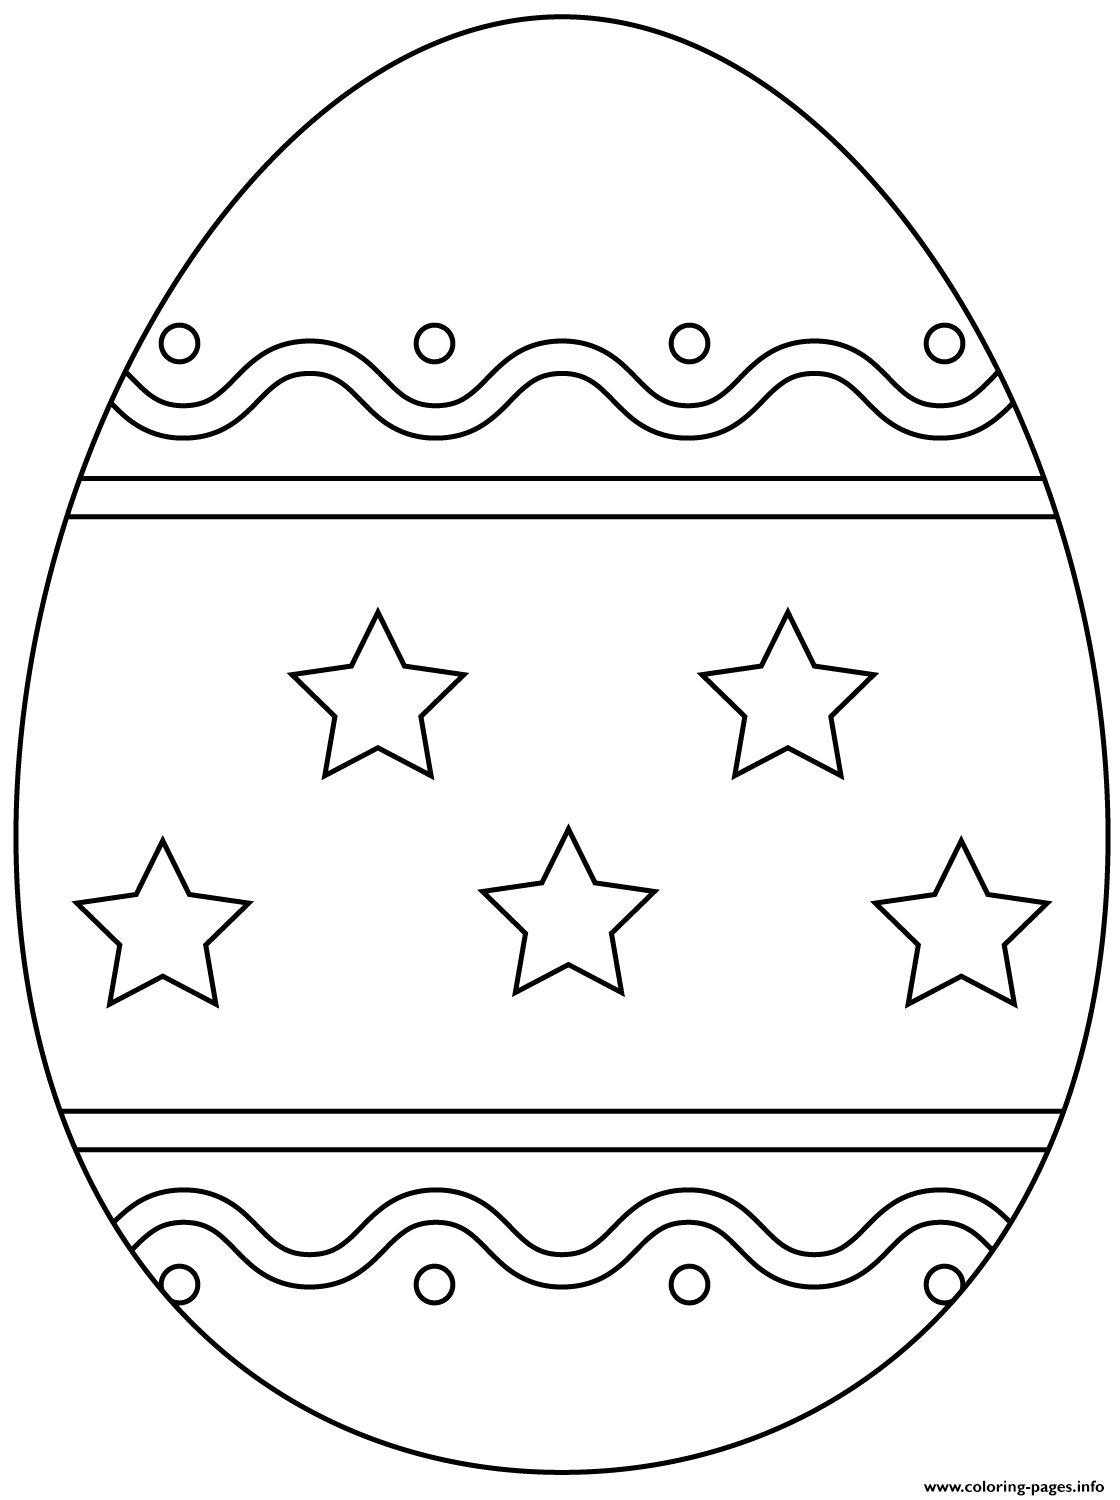 Easter Egg With Simple Pattern Coloring Pages Printable